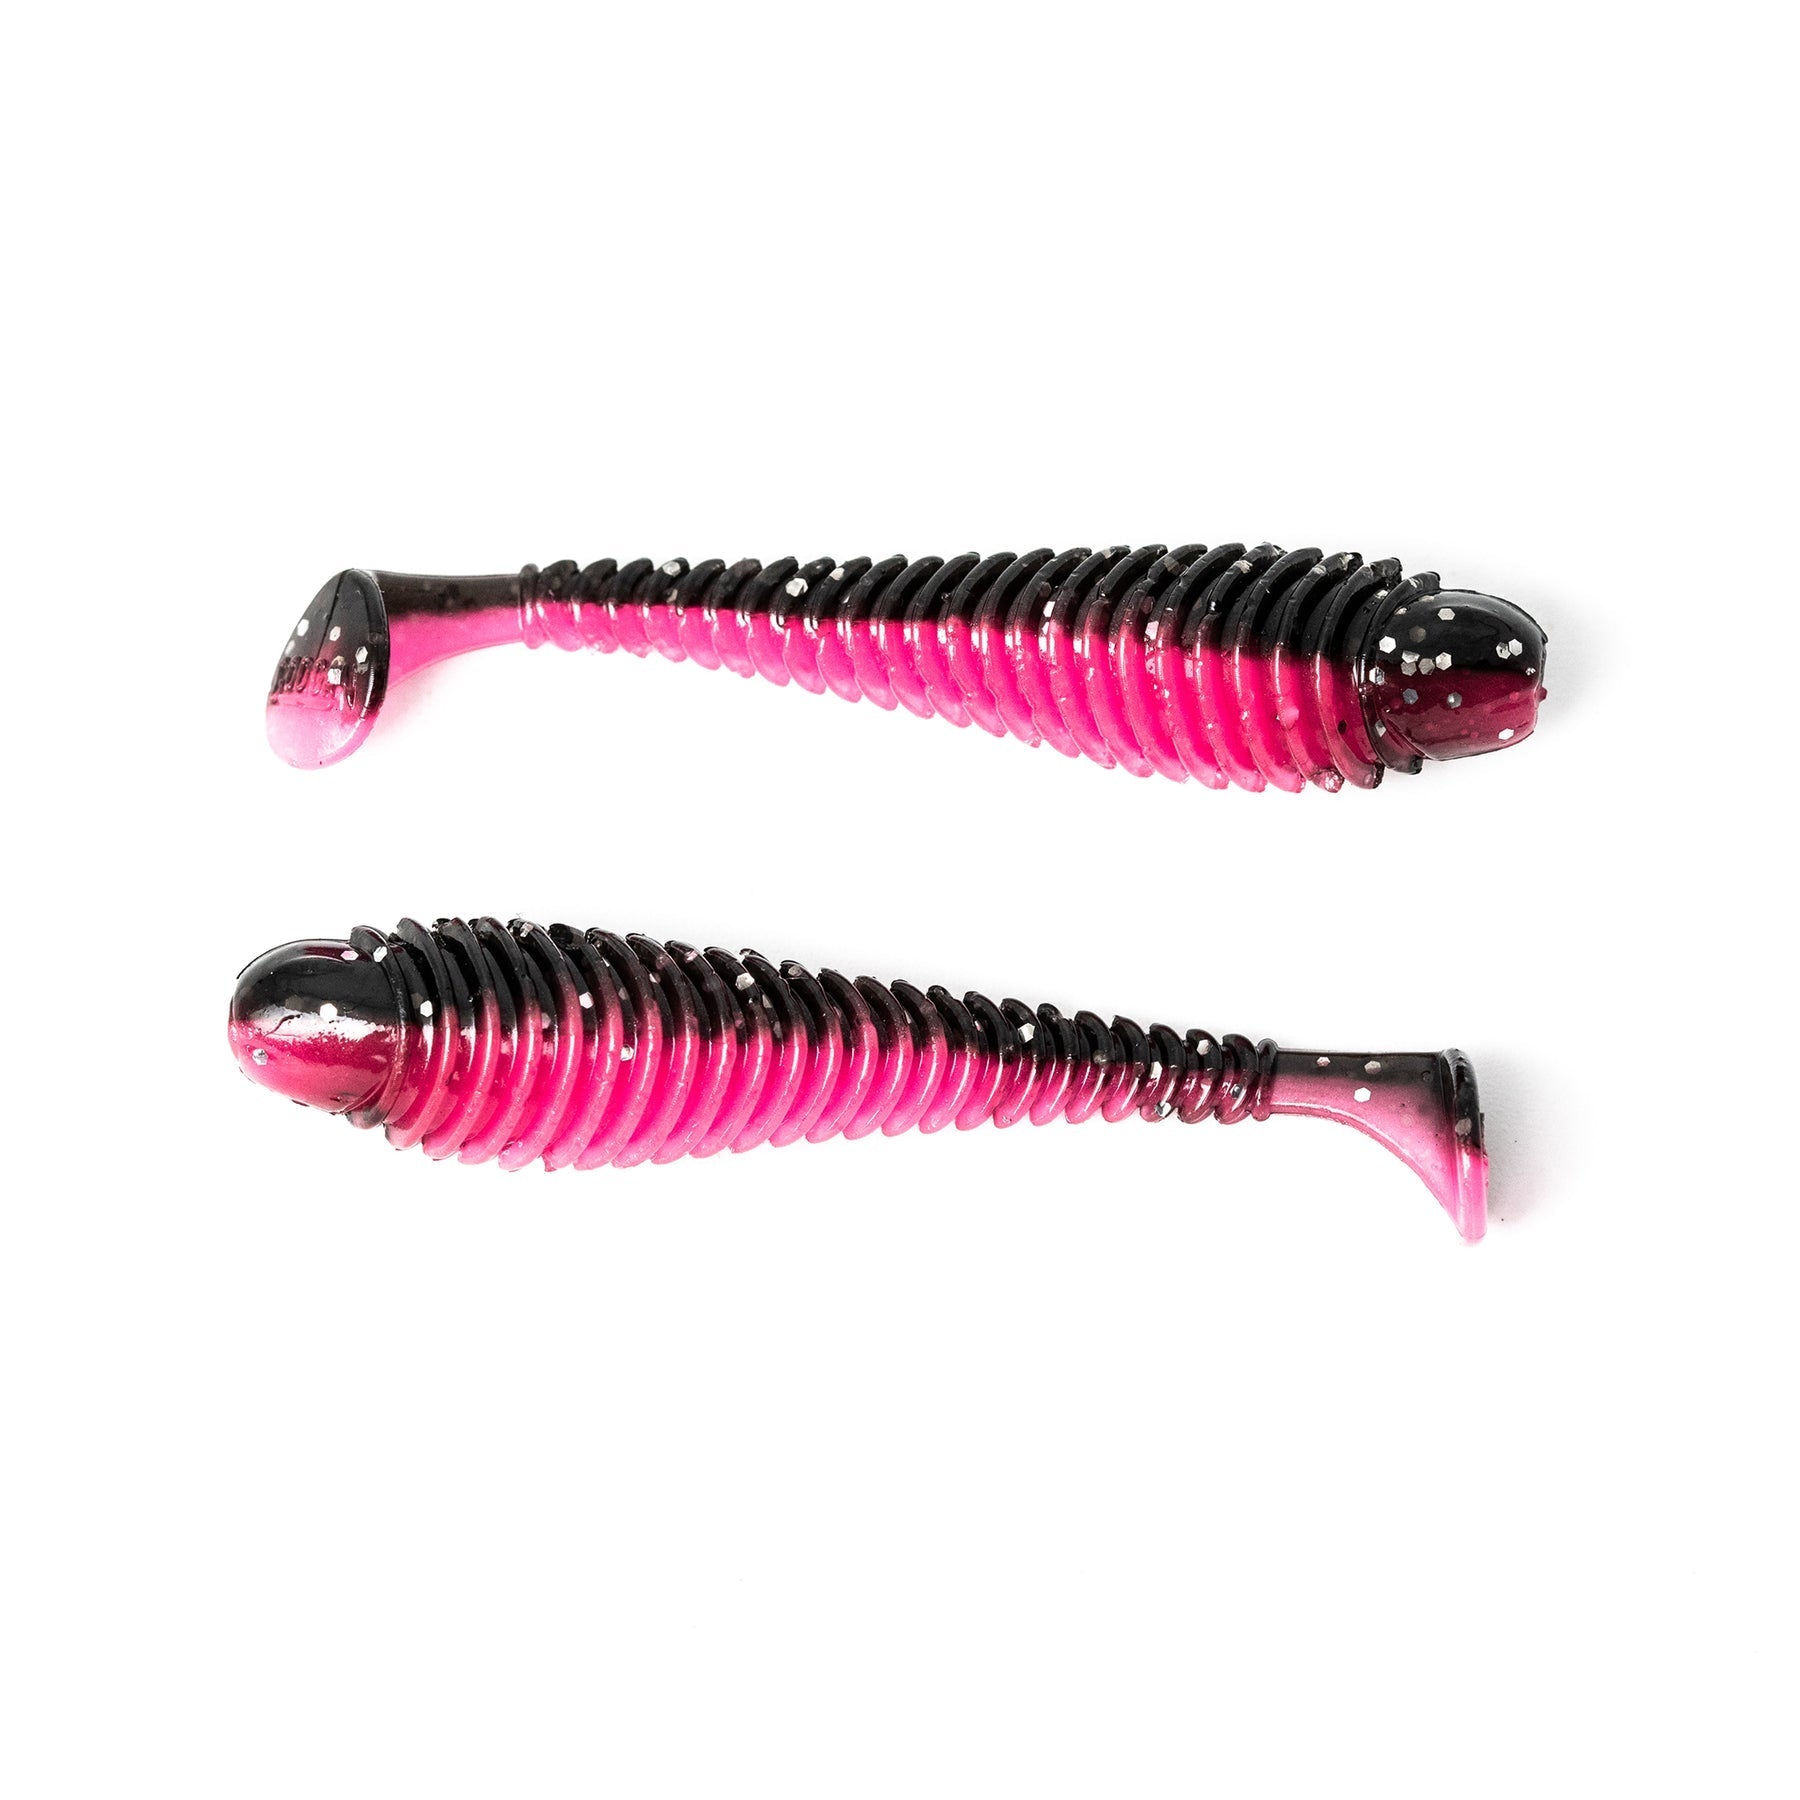 Crappie NOW - The coming-in-July Bobby Garland Crappie Baits Mayfly  insect-profile lure is loaded with features appealing to multiple senses  that crappie rely on for feeding. The Mayfly is a 2.25-inch insect-profile